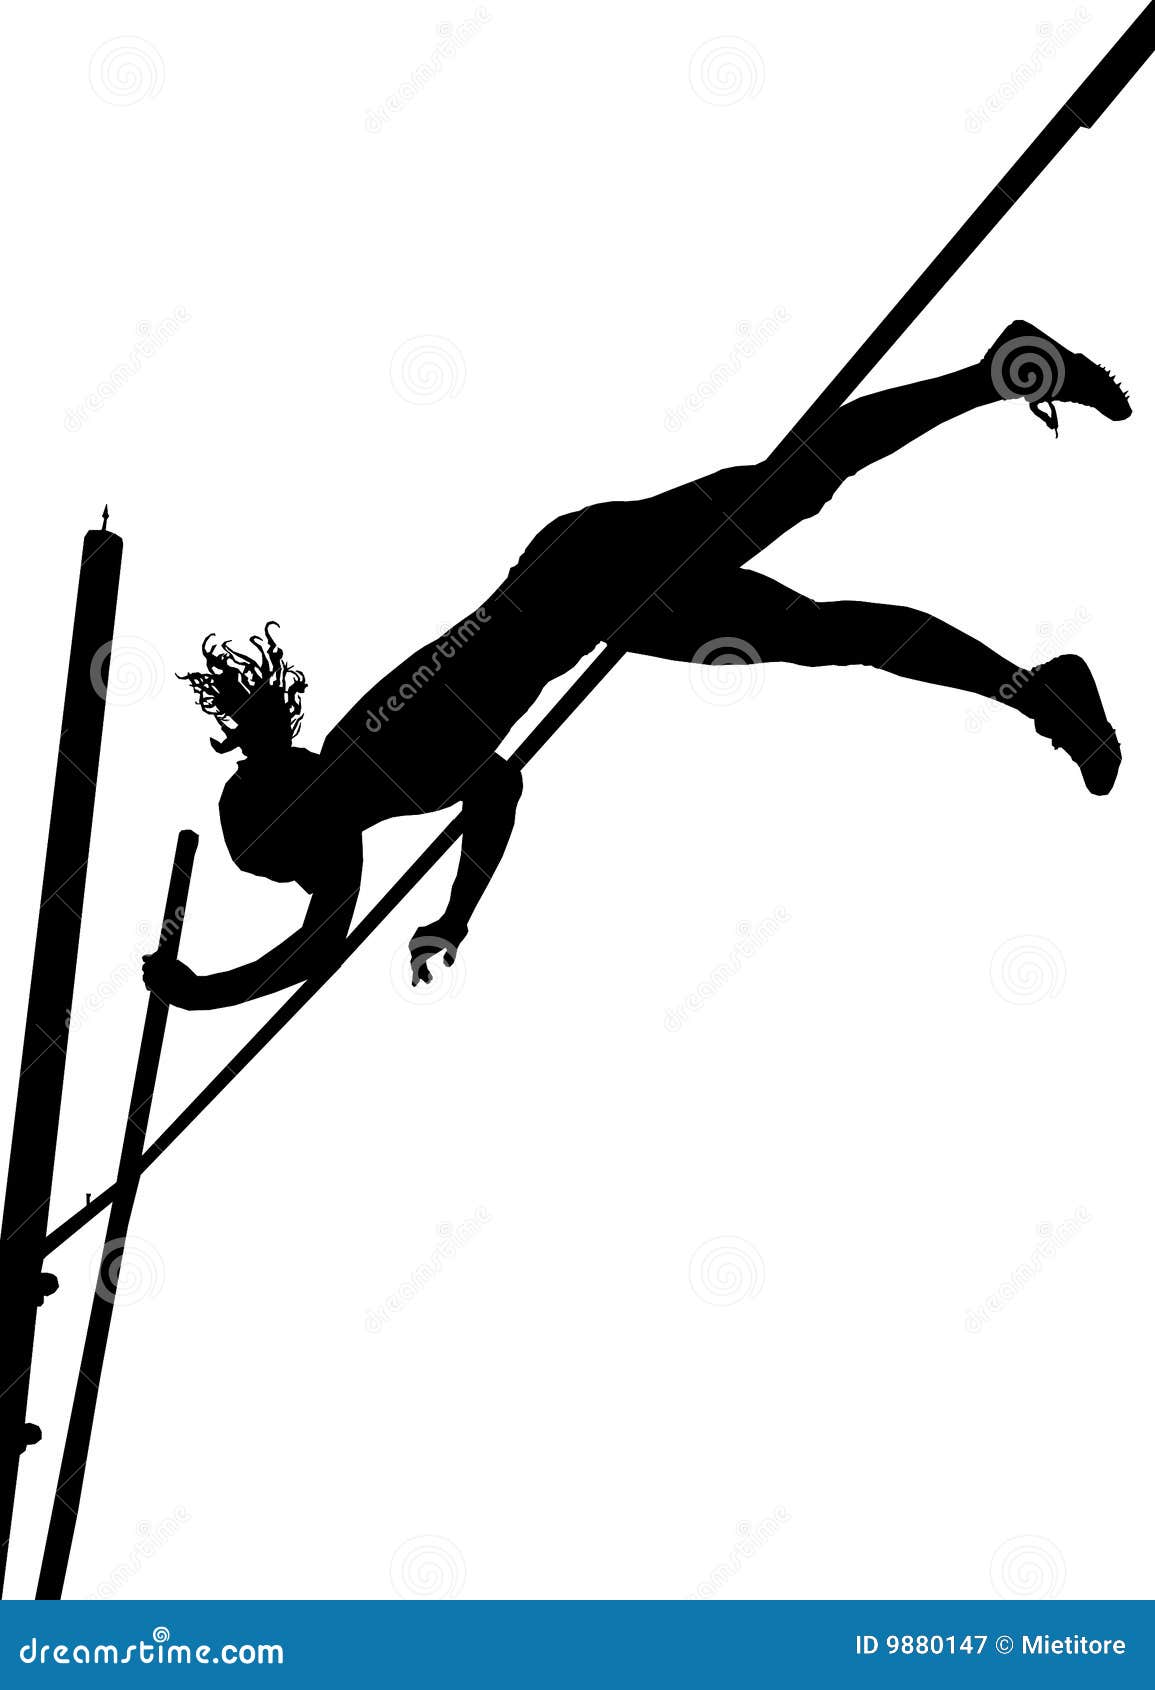 silhouettes - pole vaulting